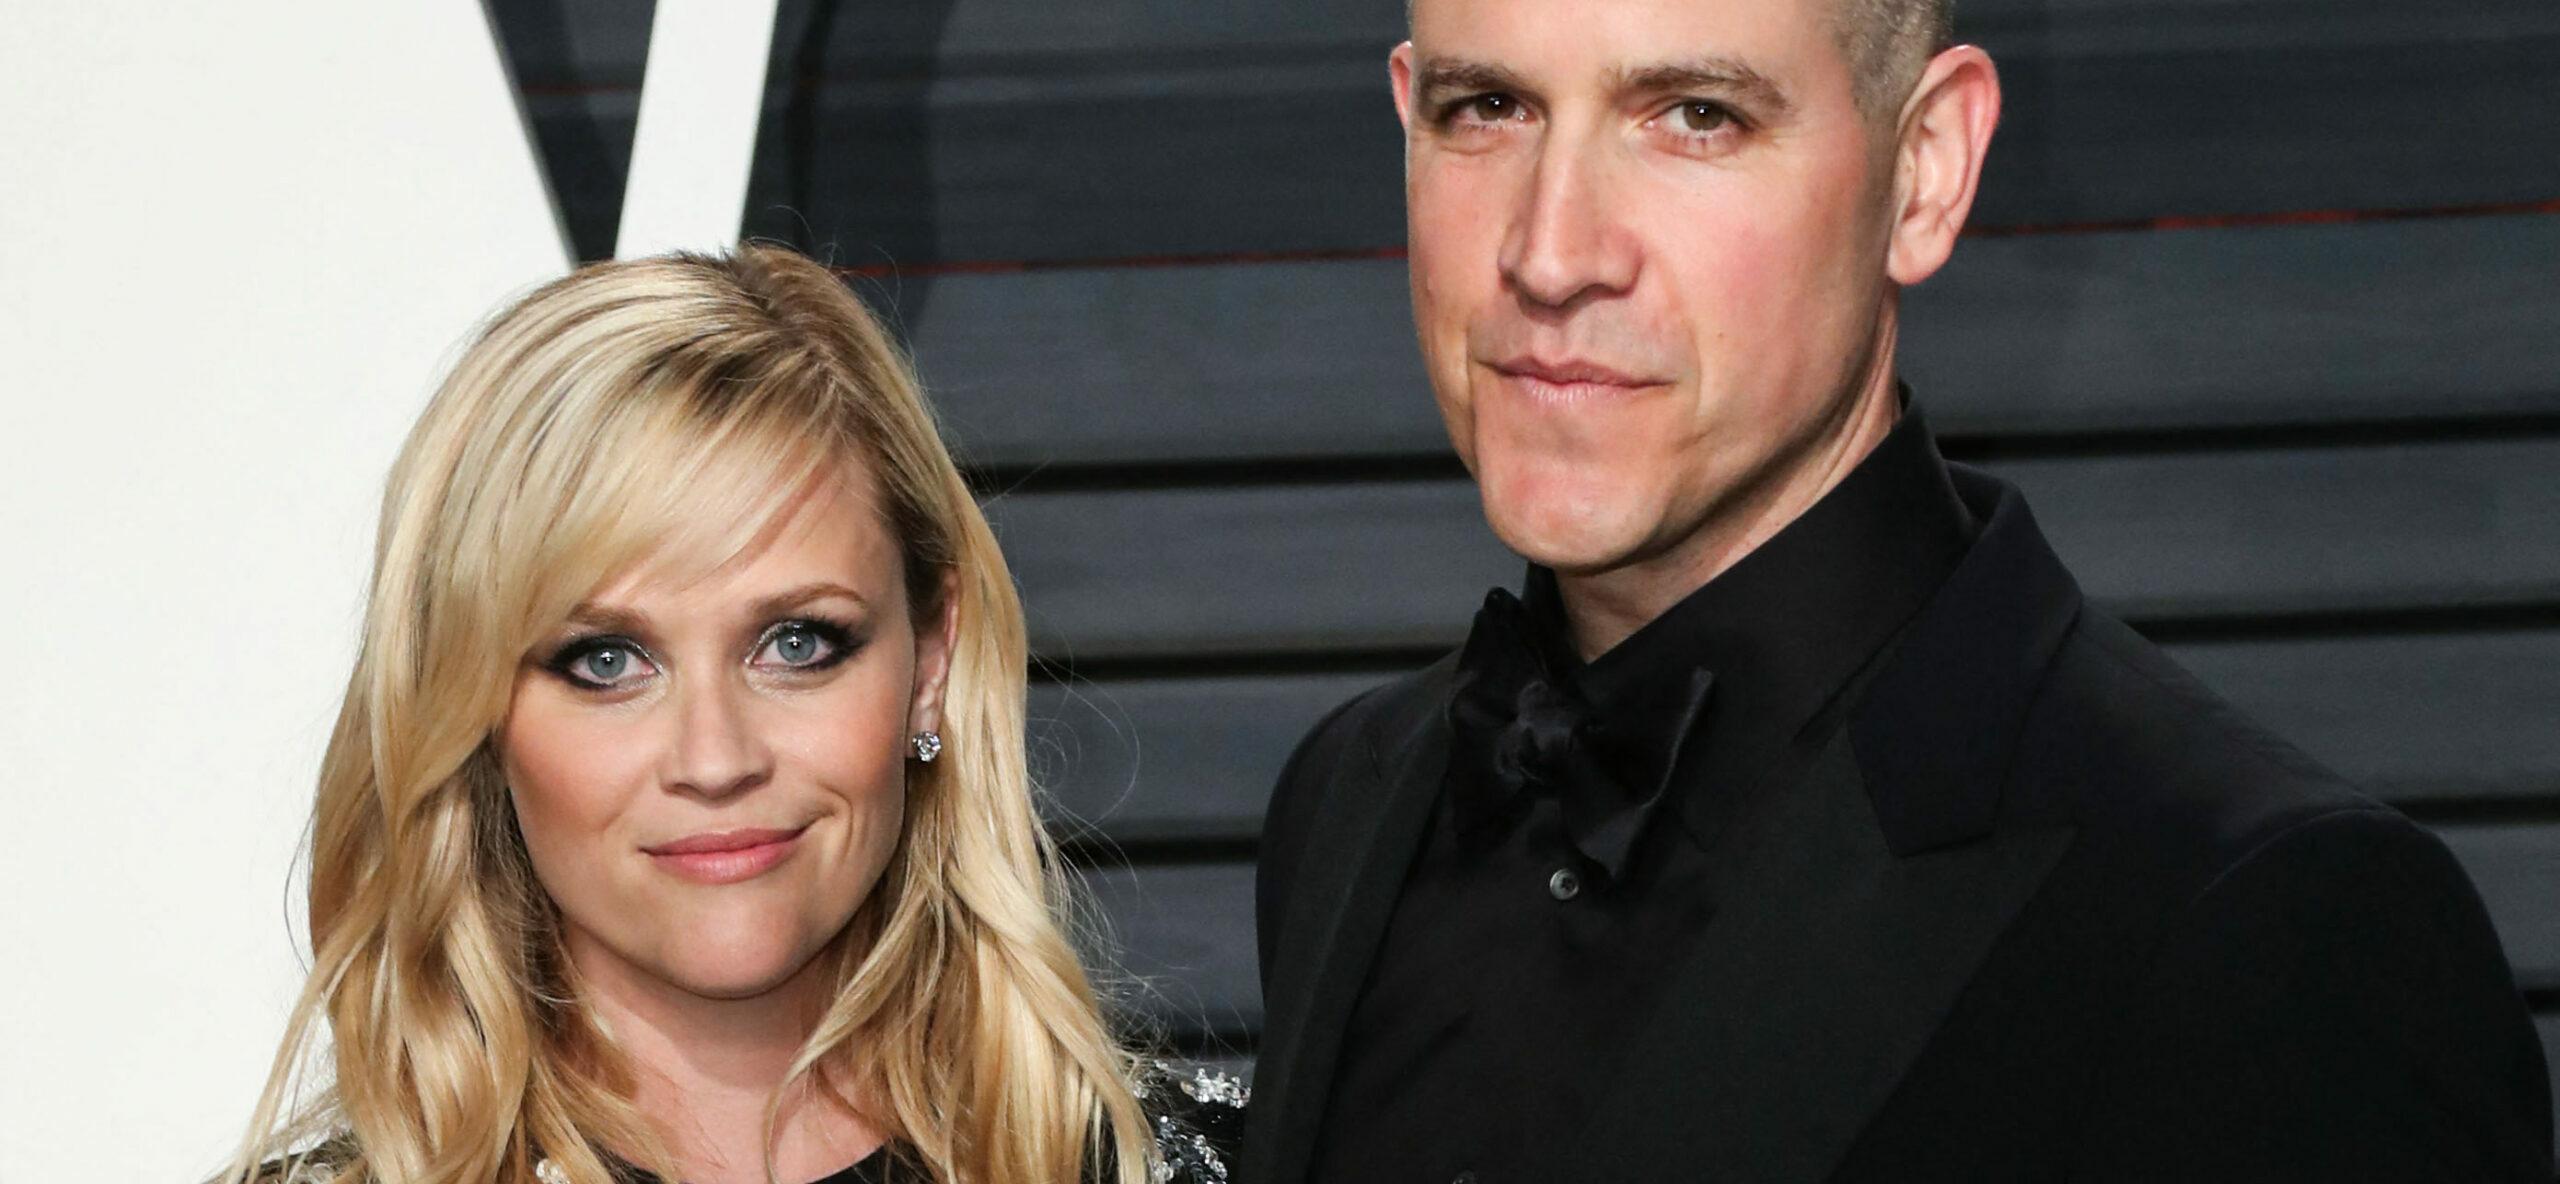 Reese Witherspoon Is Officially Divorced From Jim Toth After Signing Agreement